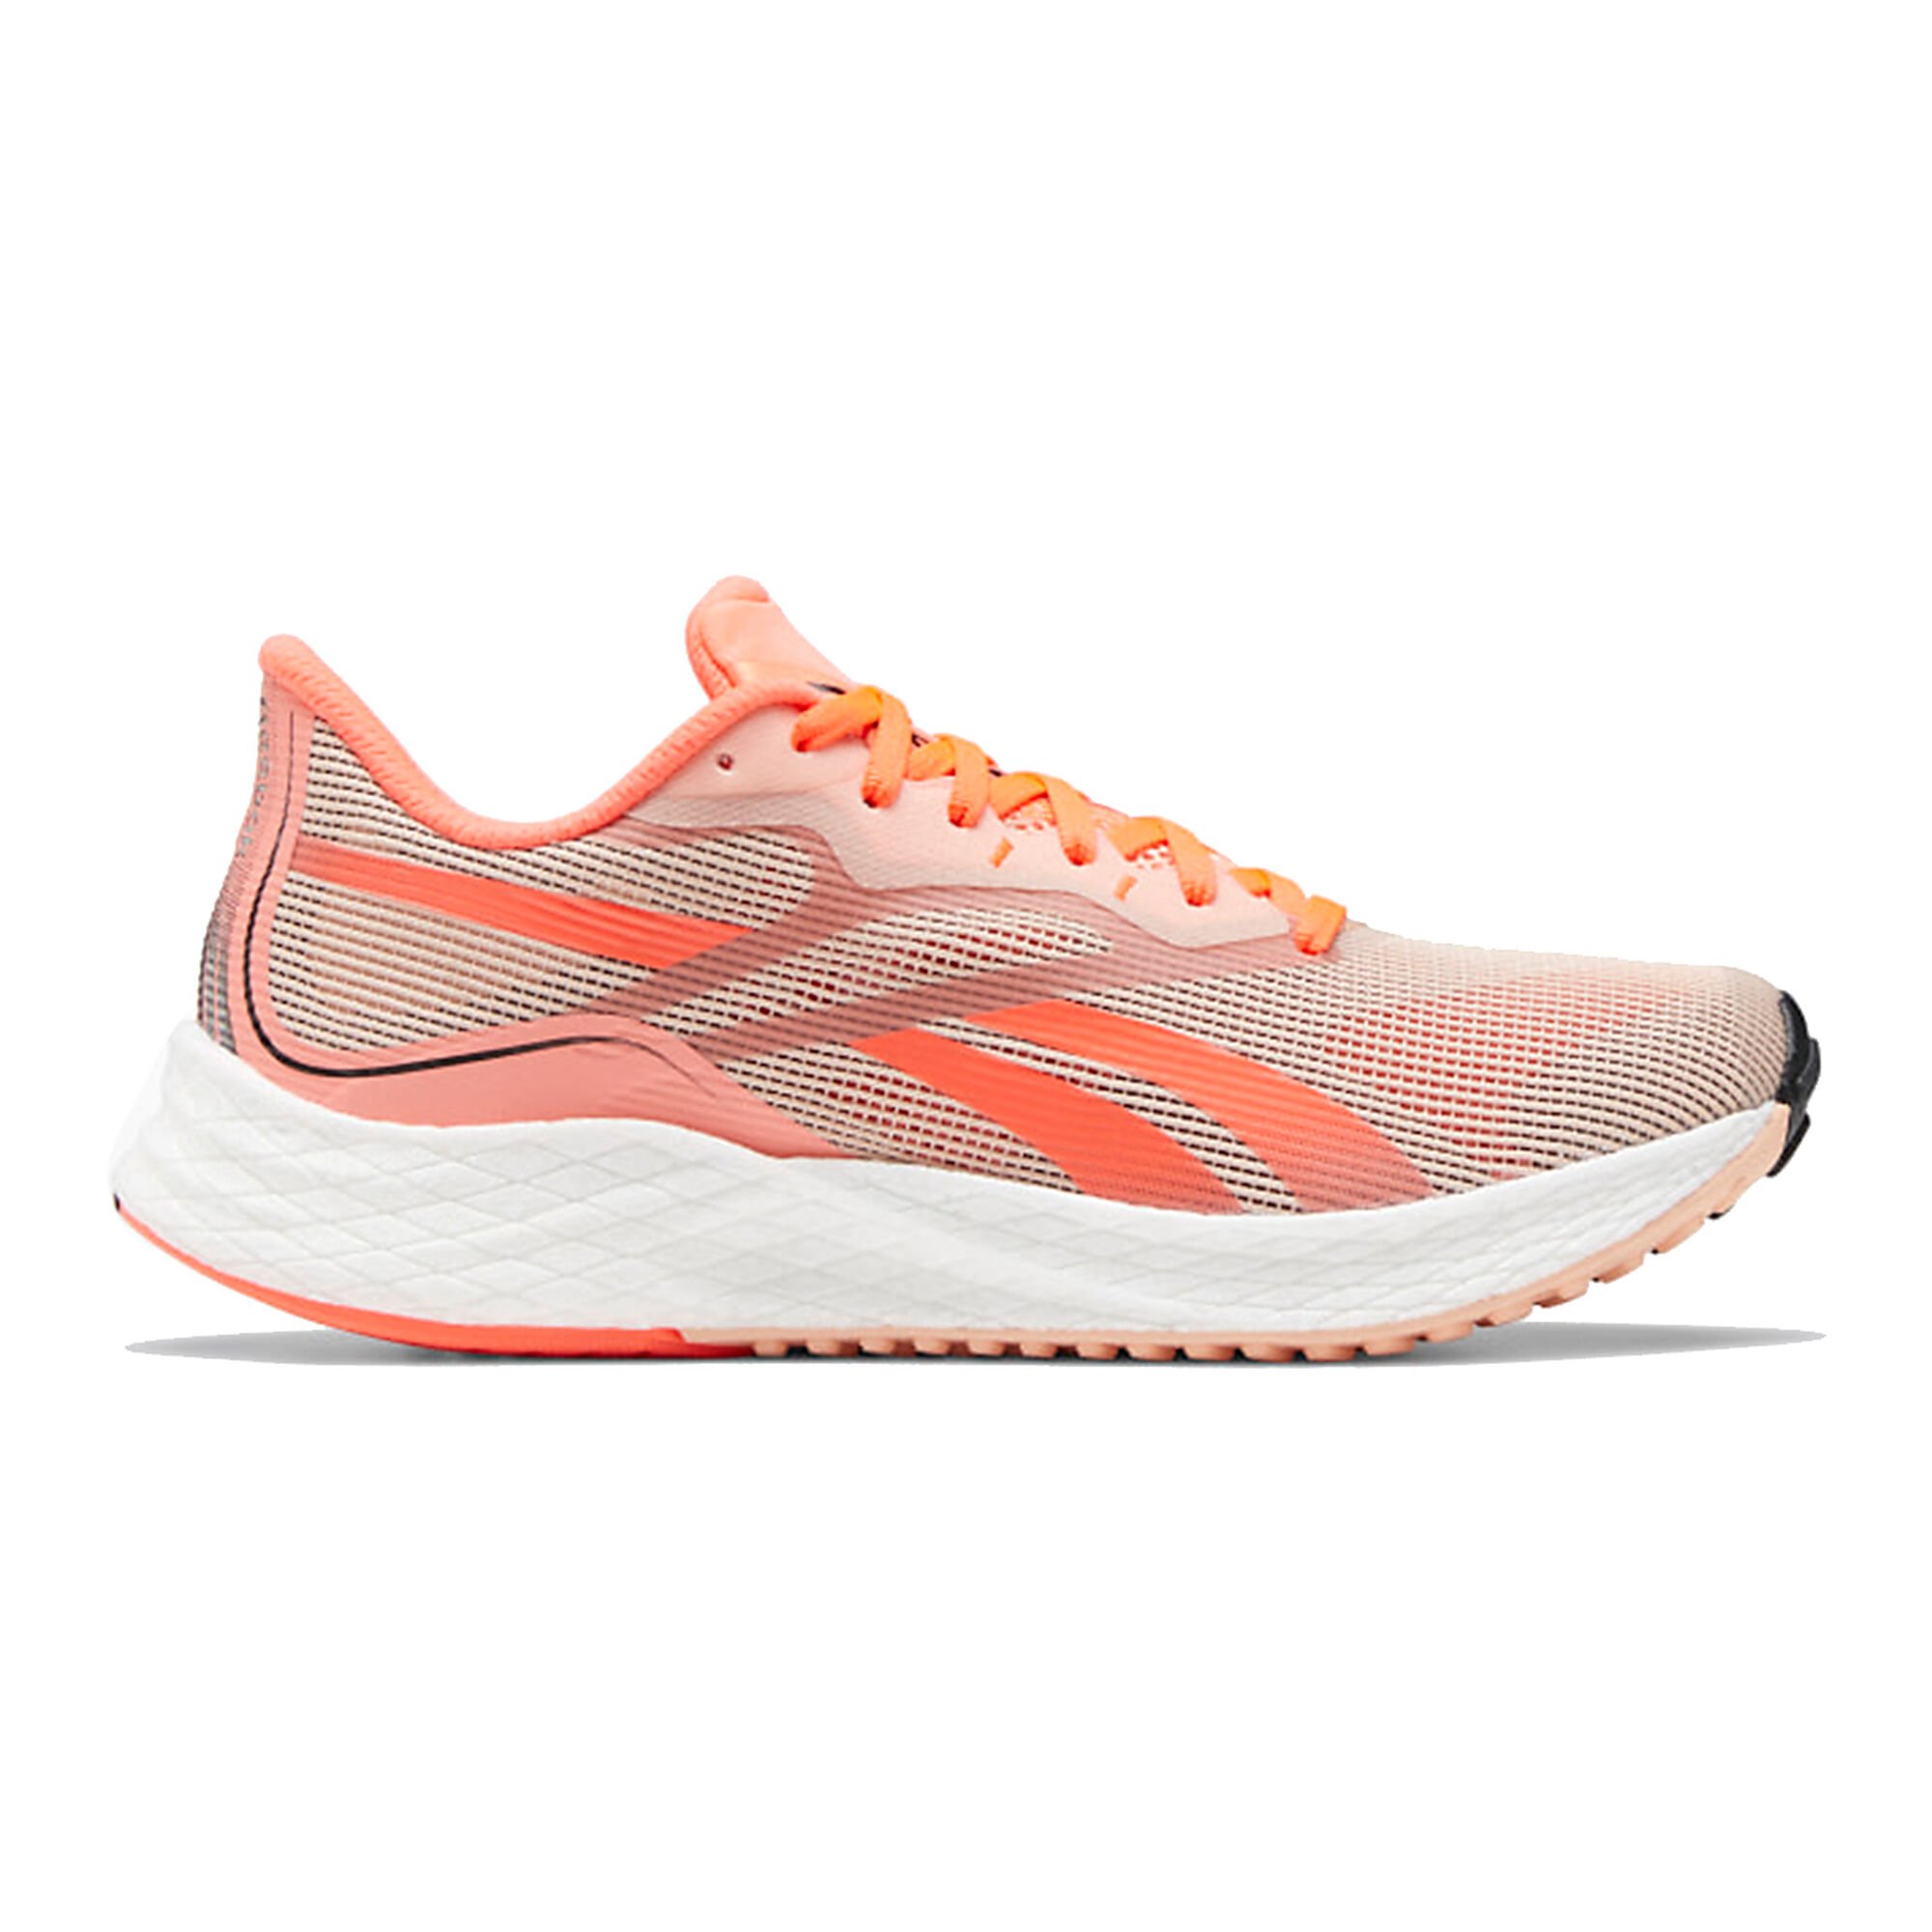 10 Best Running Shoes For Women in 2021 | RRspace Business